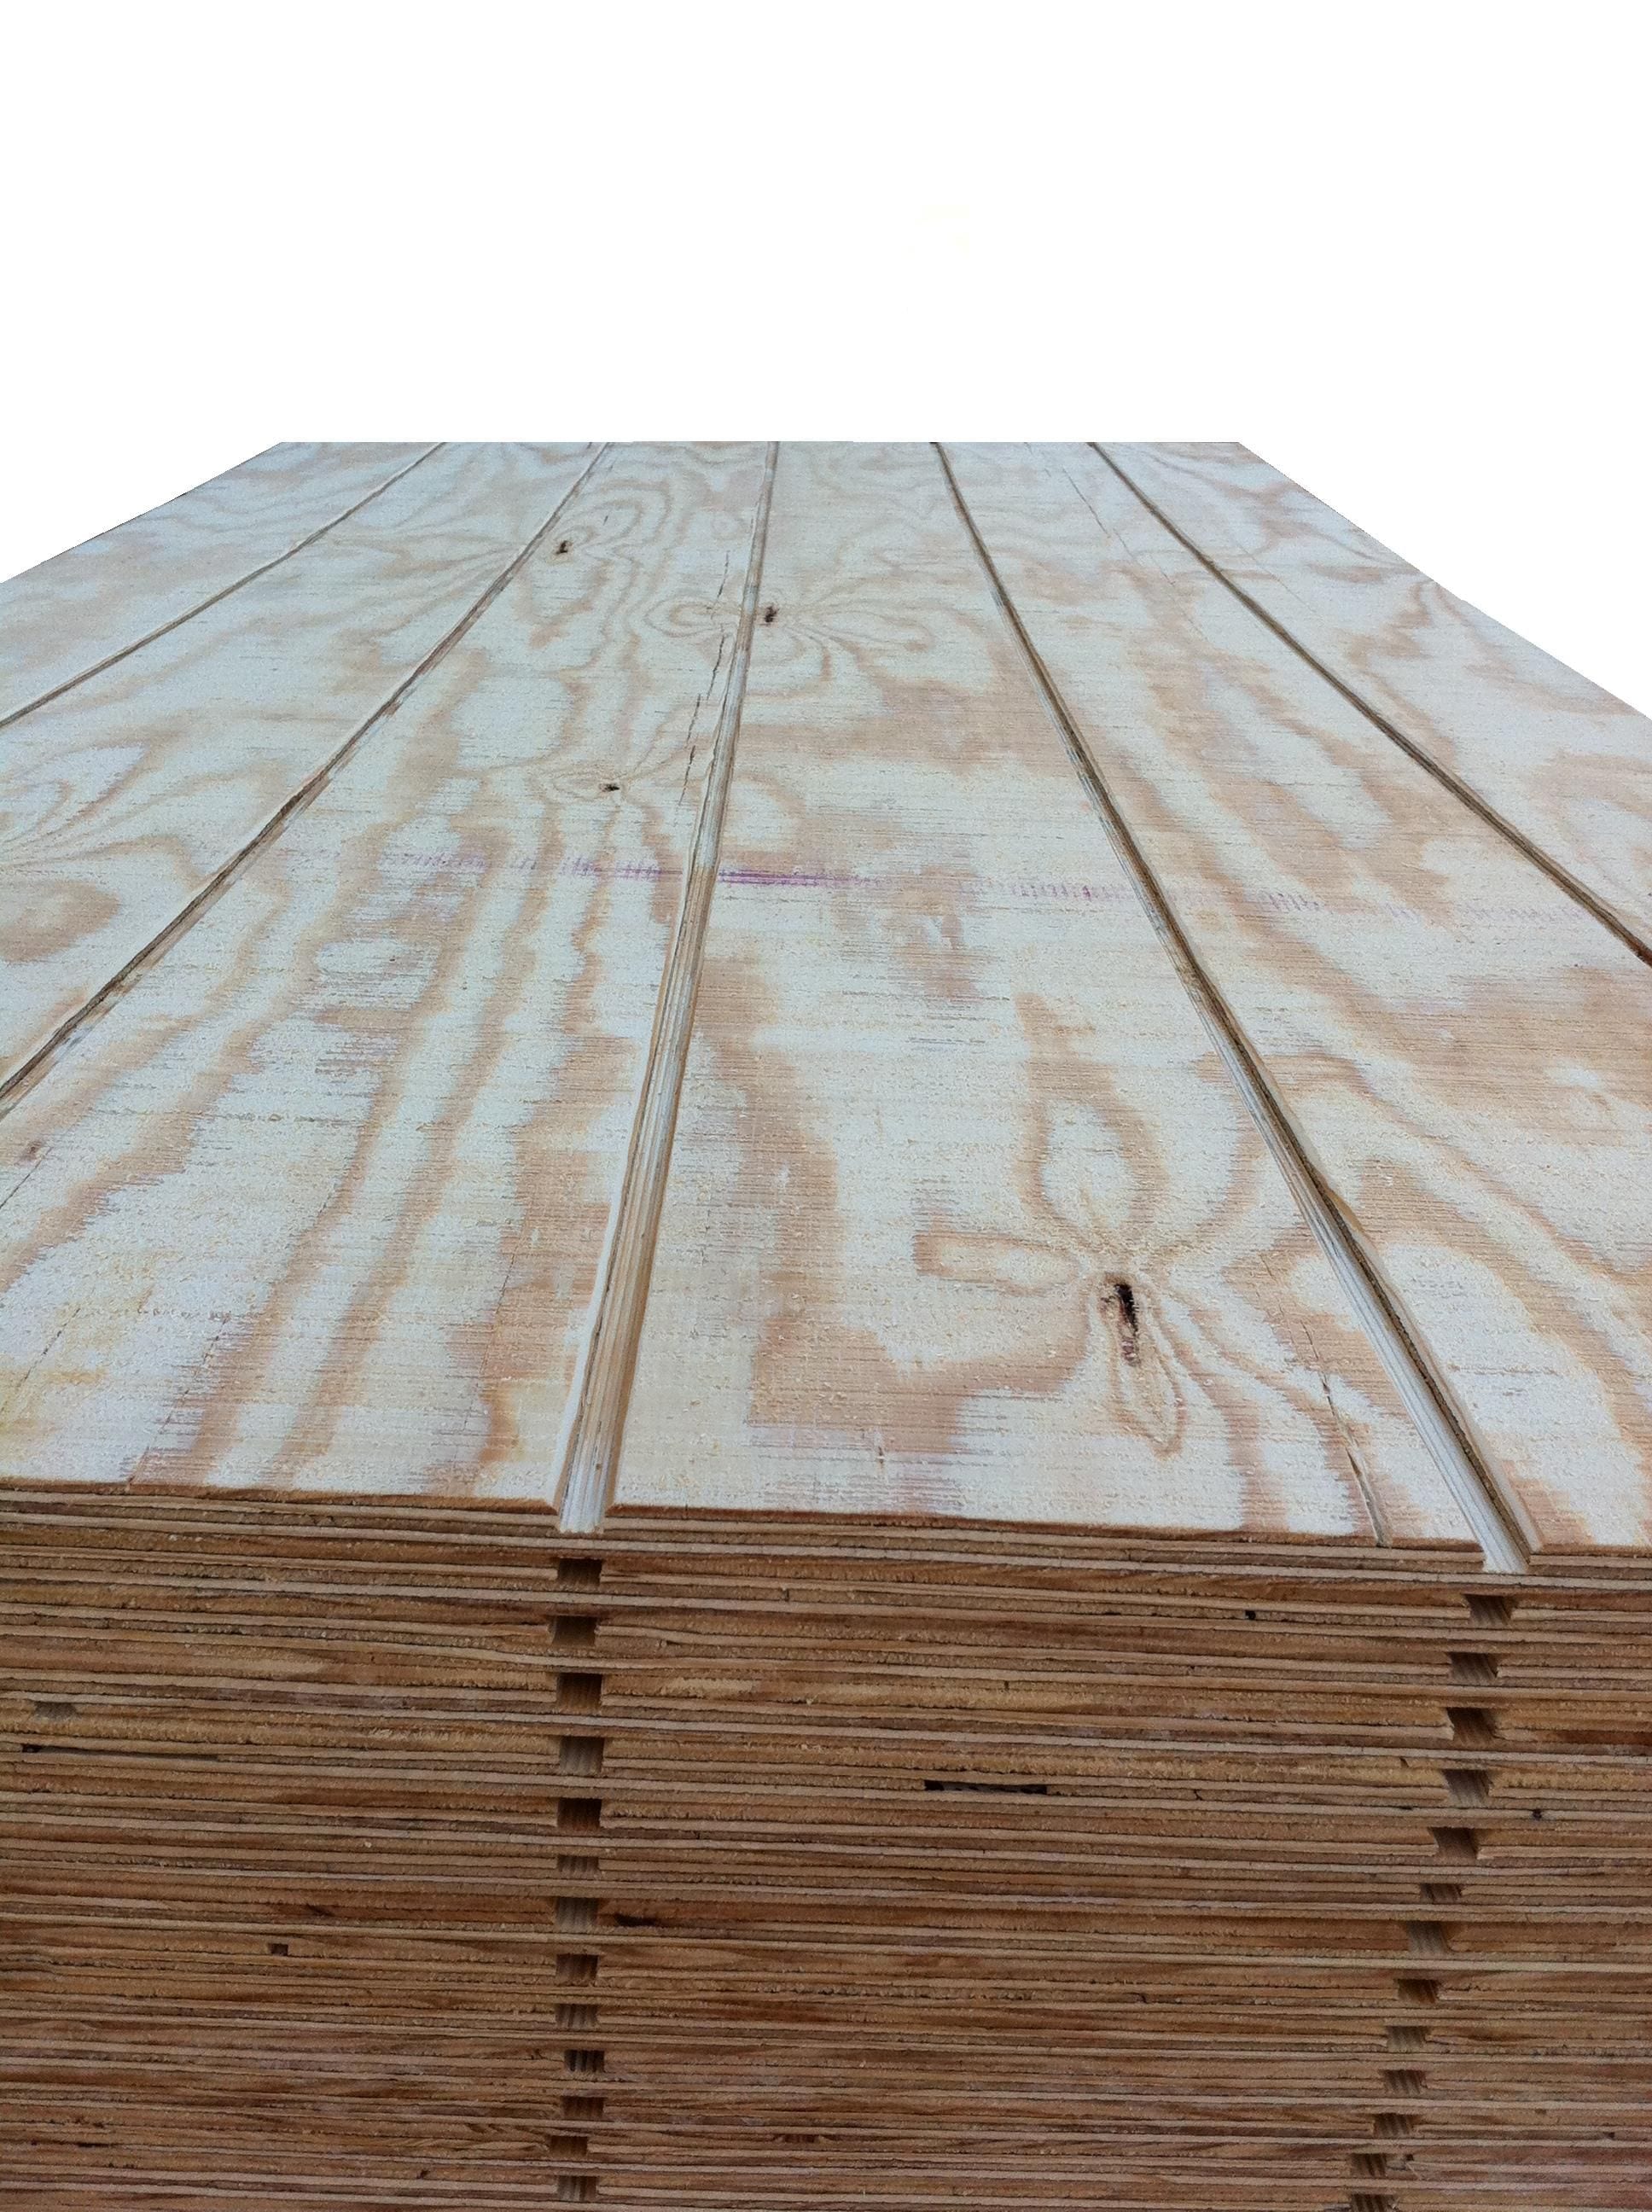 1/16 in. x 0.5 ft. x 0.3 ft. Pressure Treated Sanded Plywood DCIU